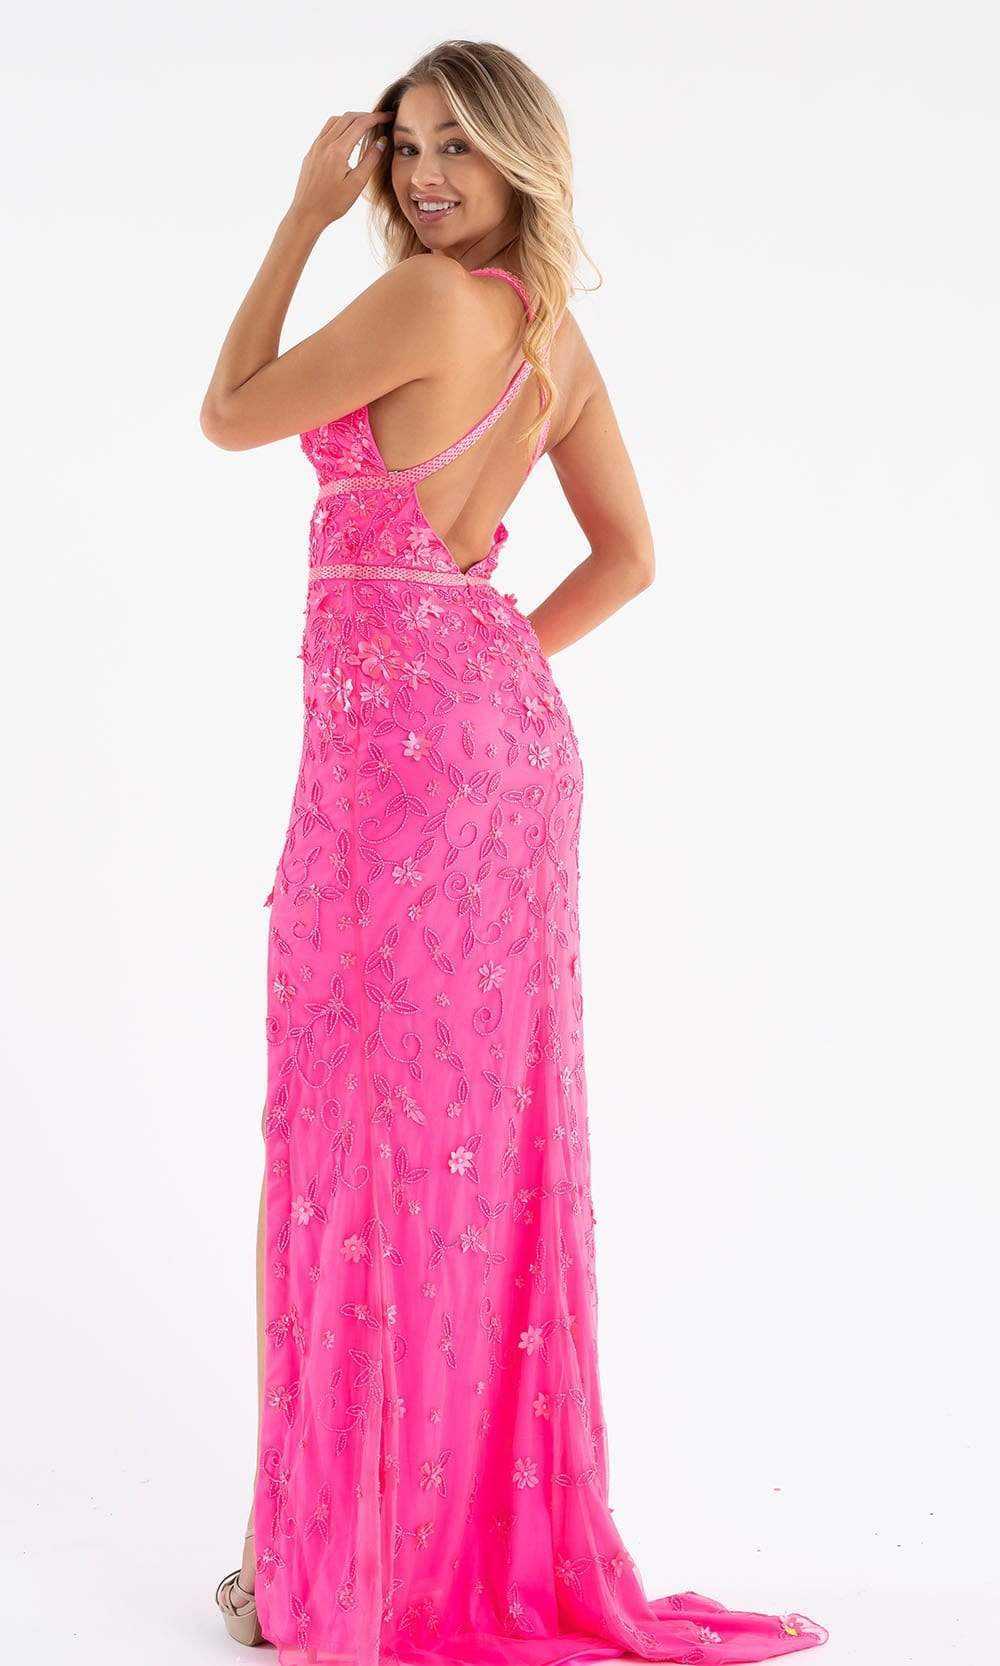 Primavera Couture, Primavera Couture - 3746 Vibrant Floral Beaded High Front Slit Gown